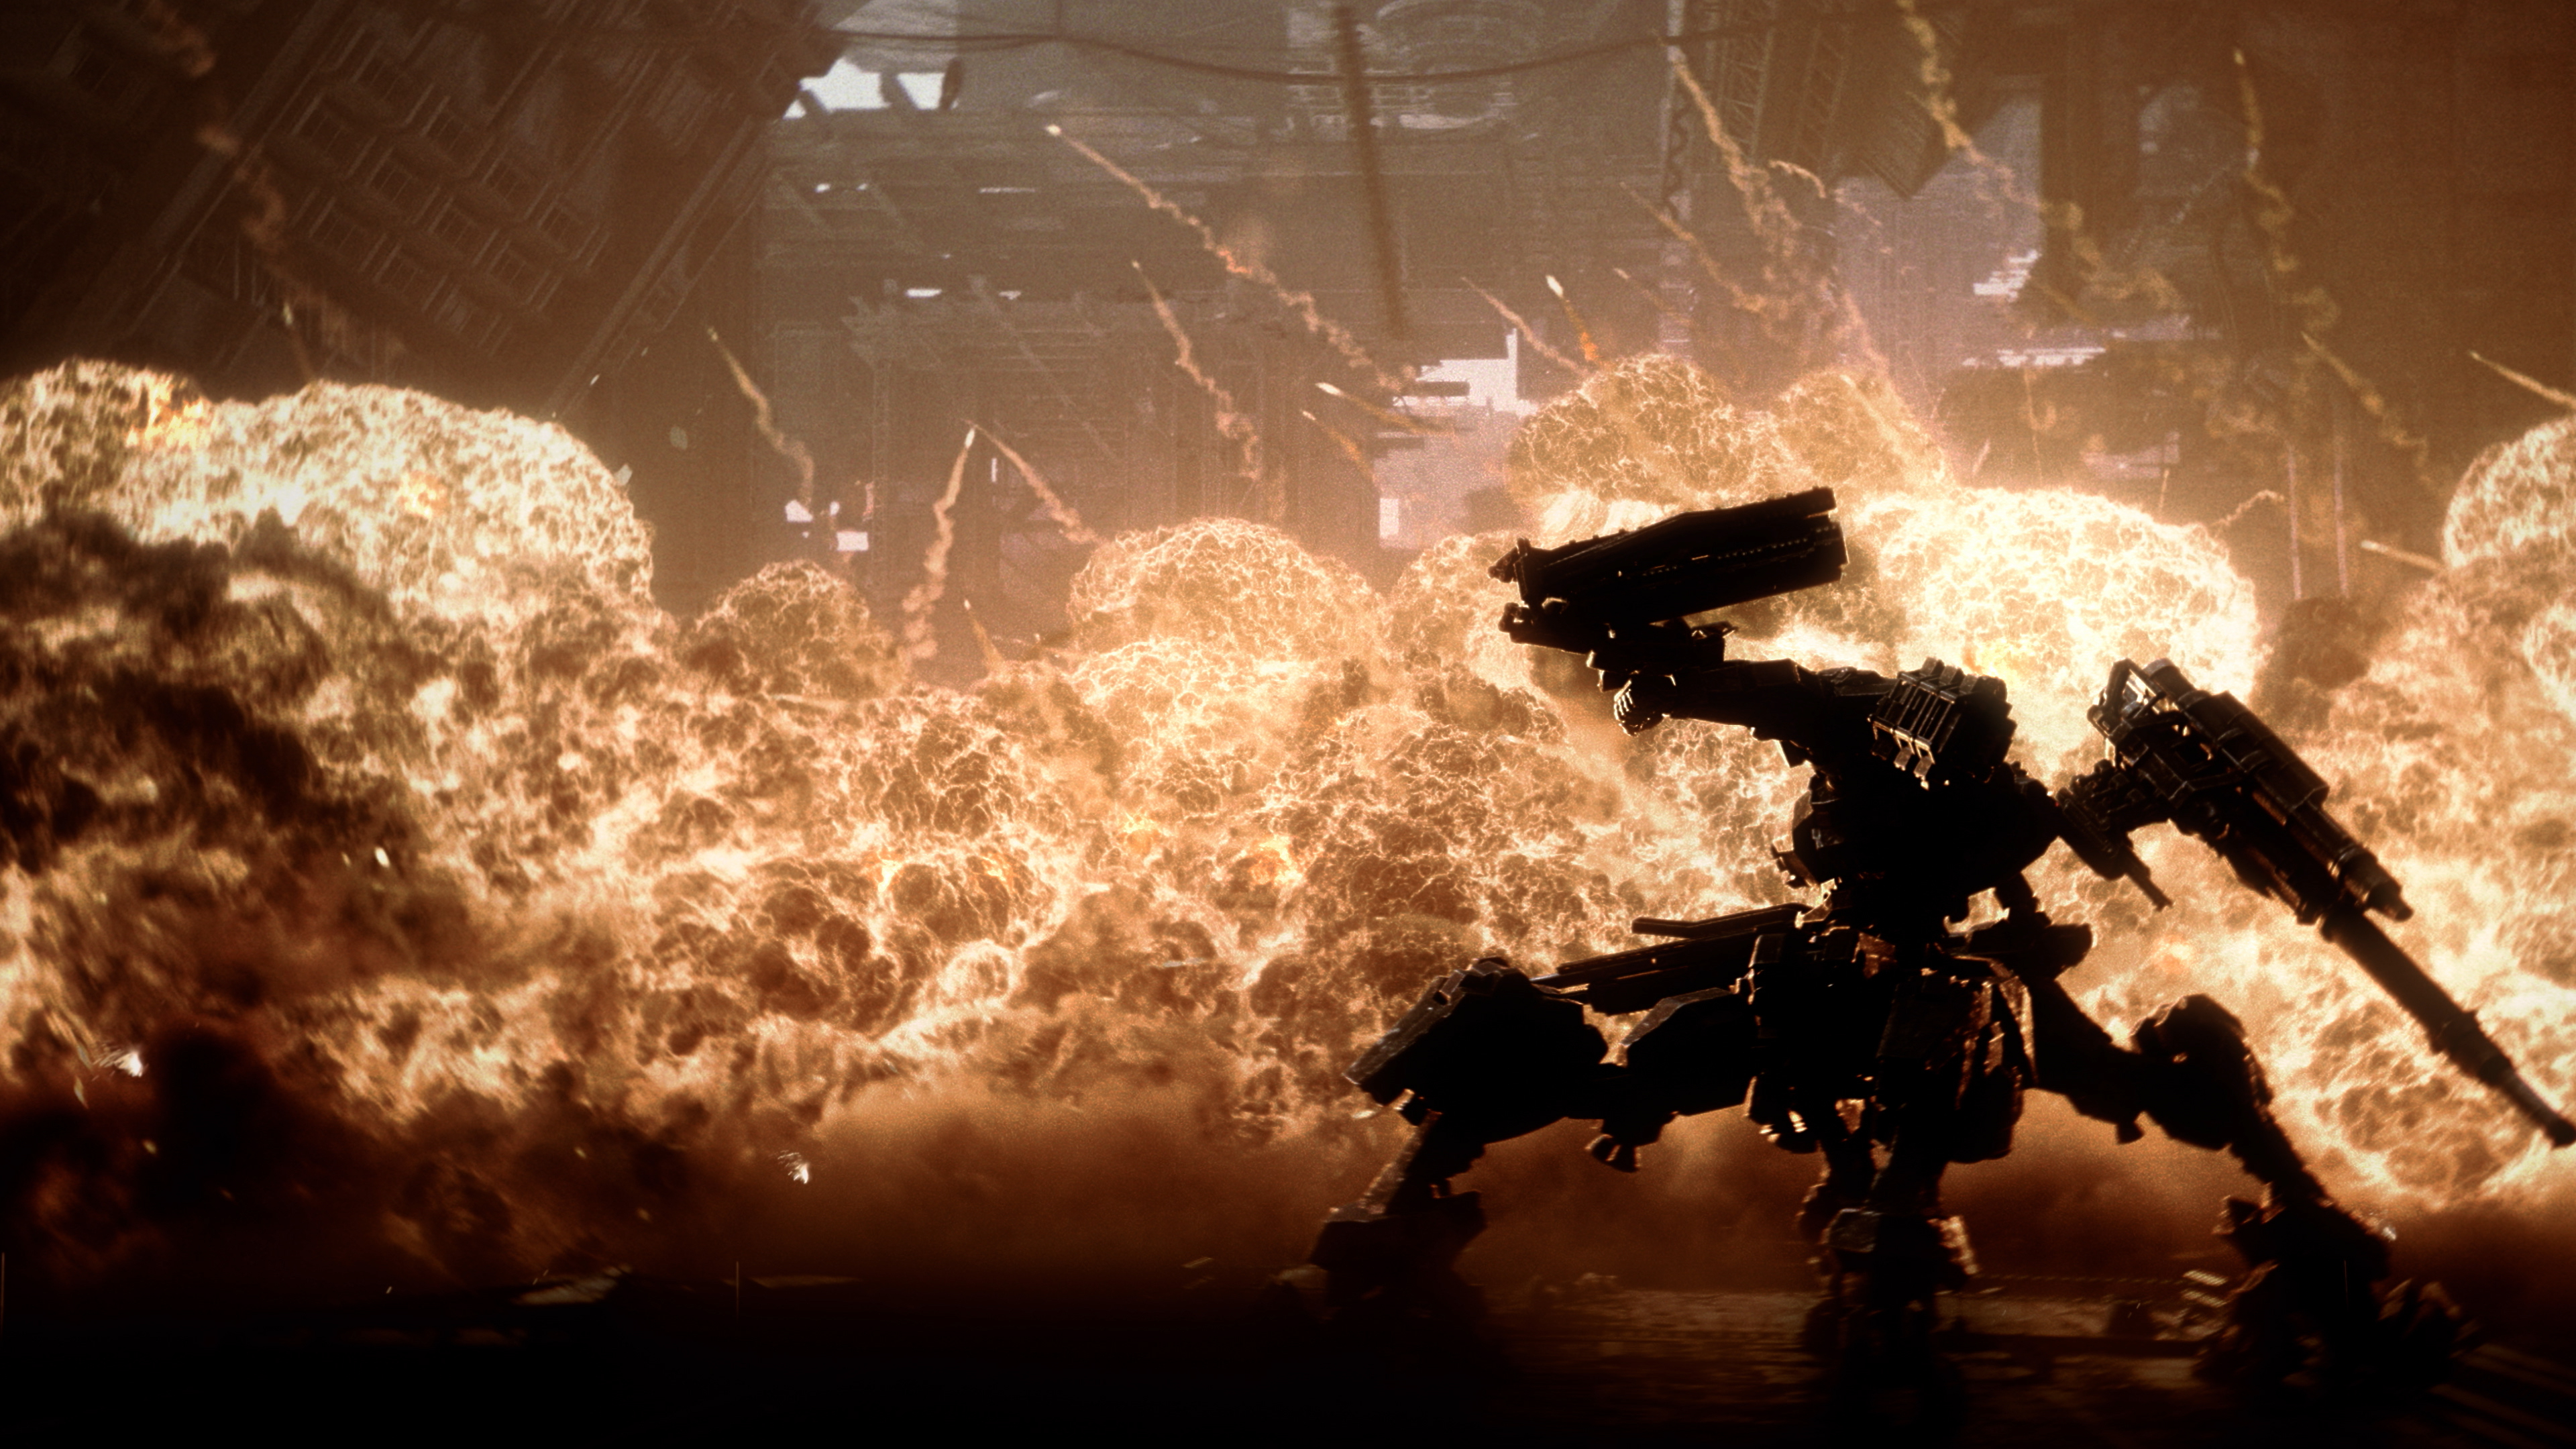 Armored core 6 mech fighting with explosion in the background